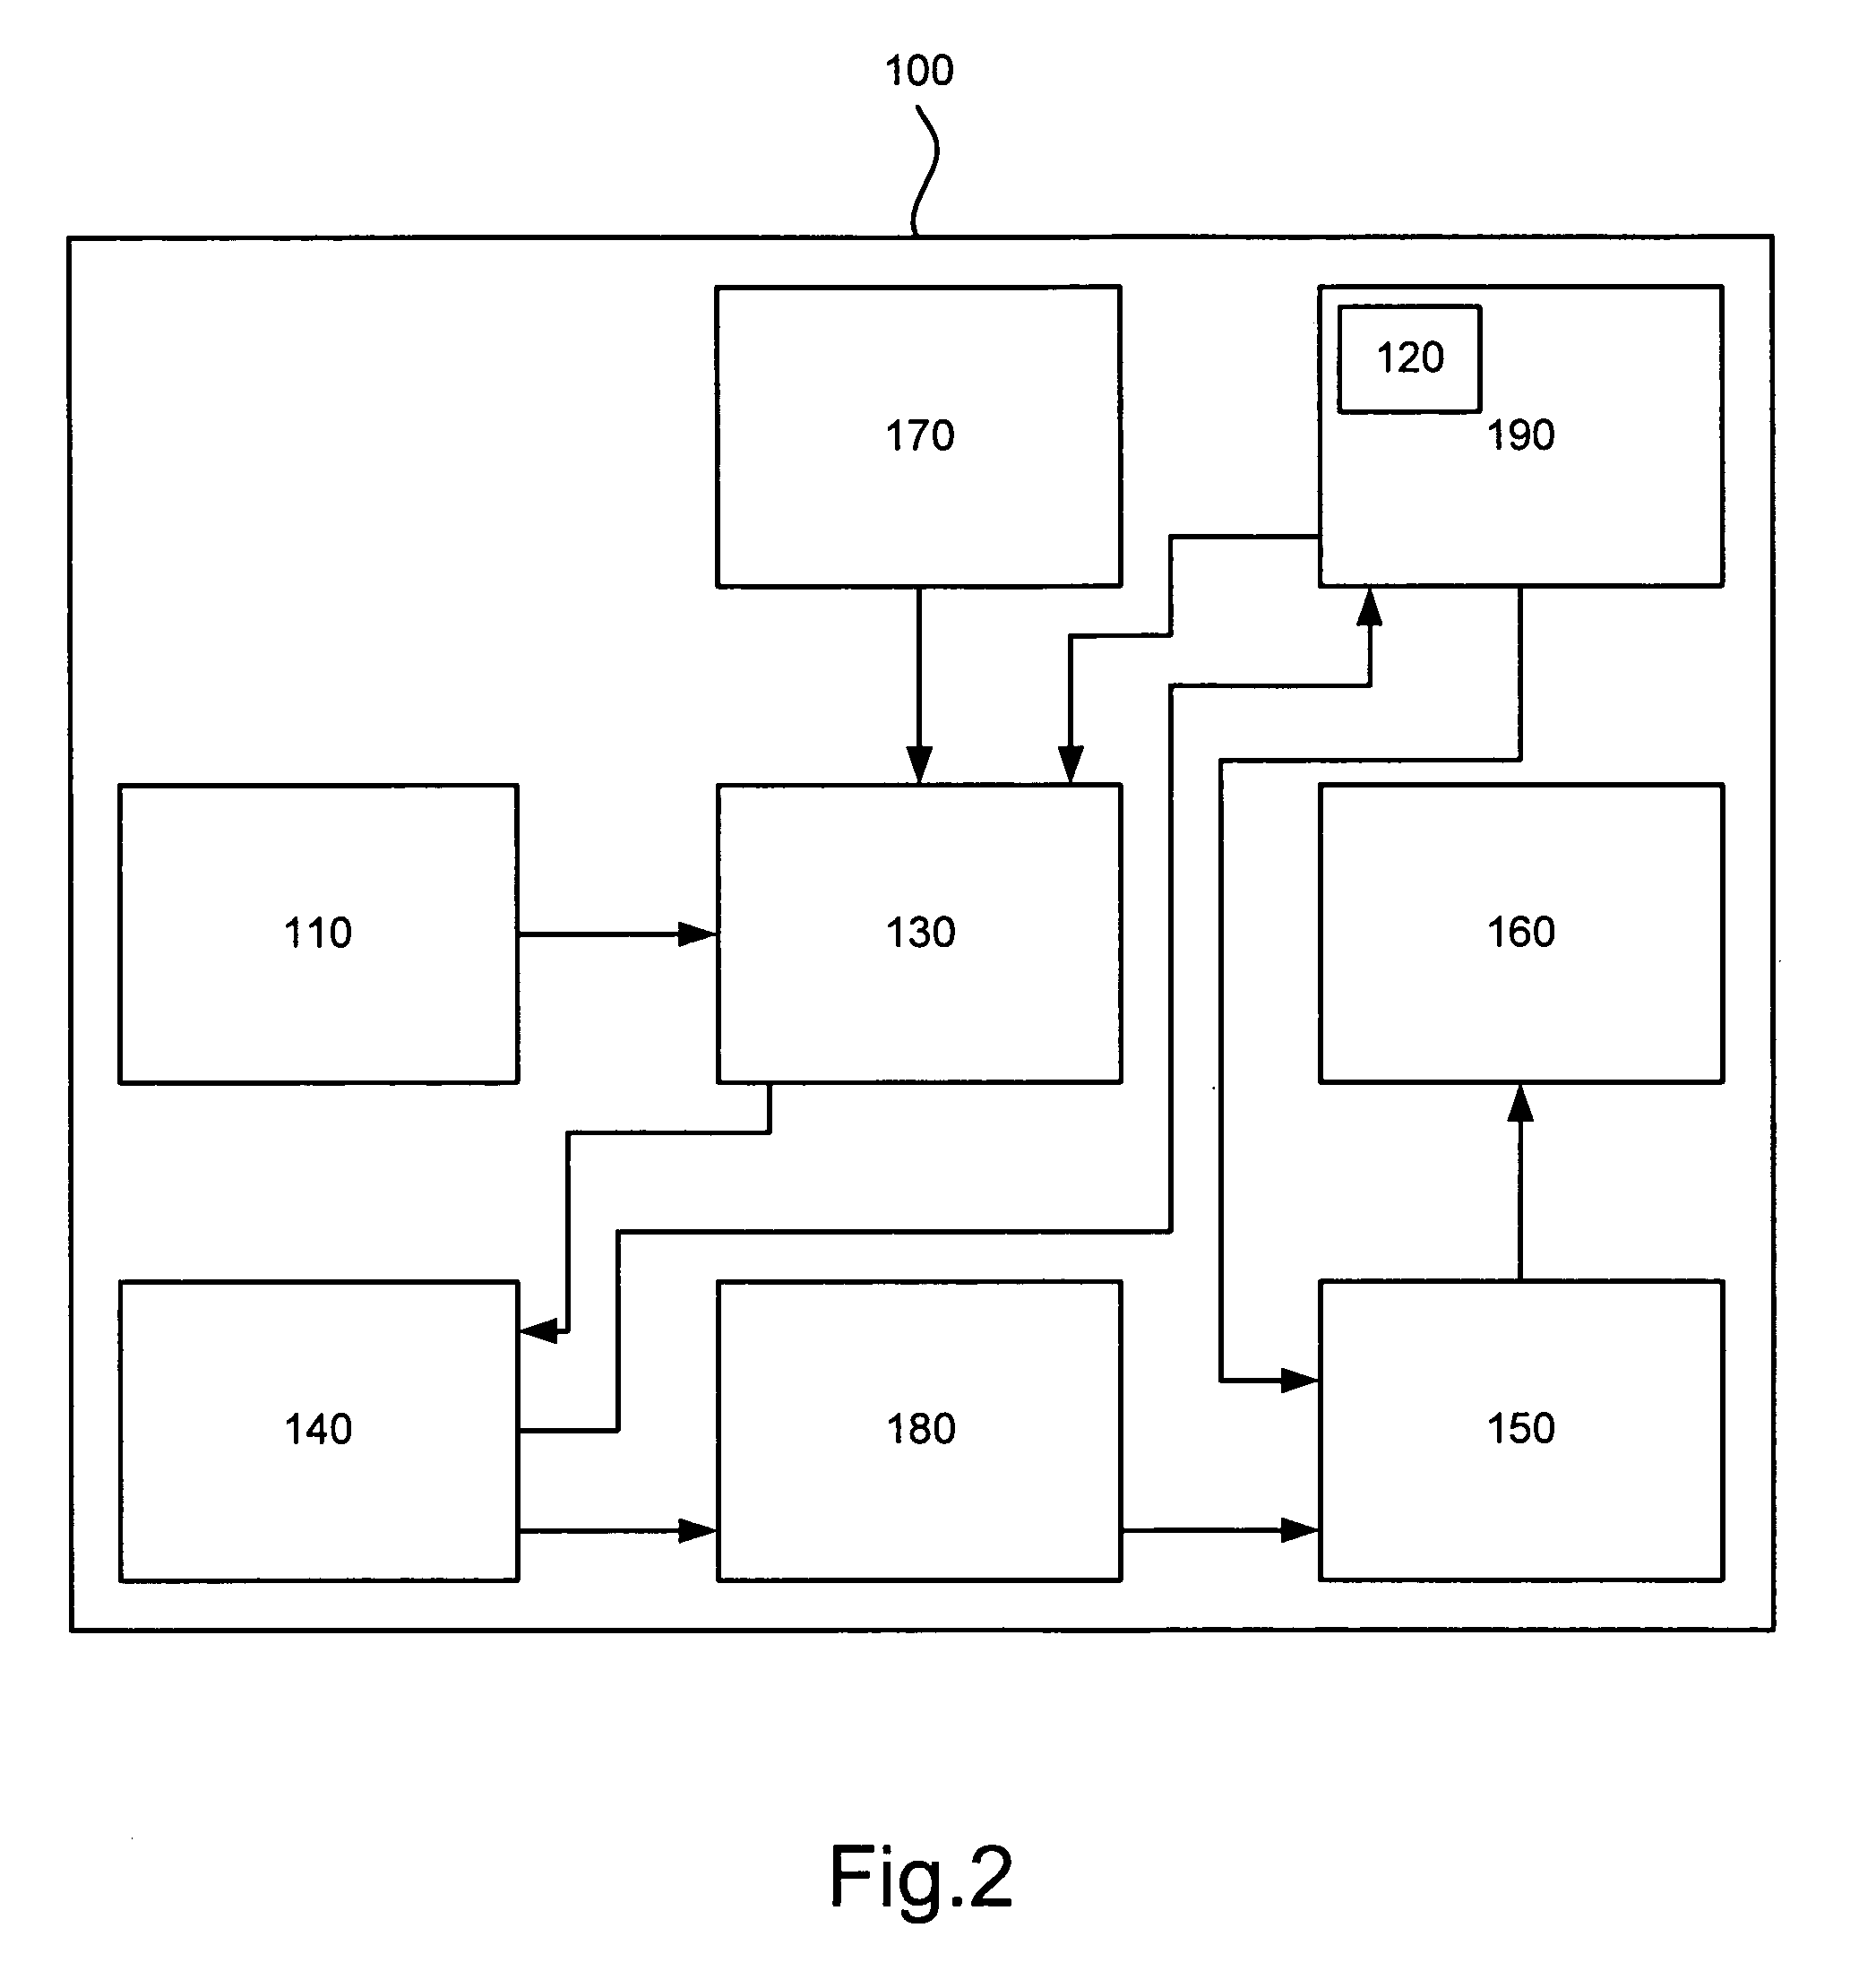 Configuration of an electronic device